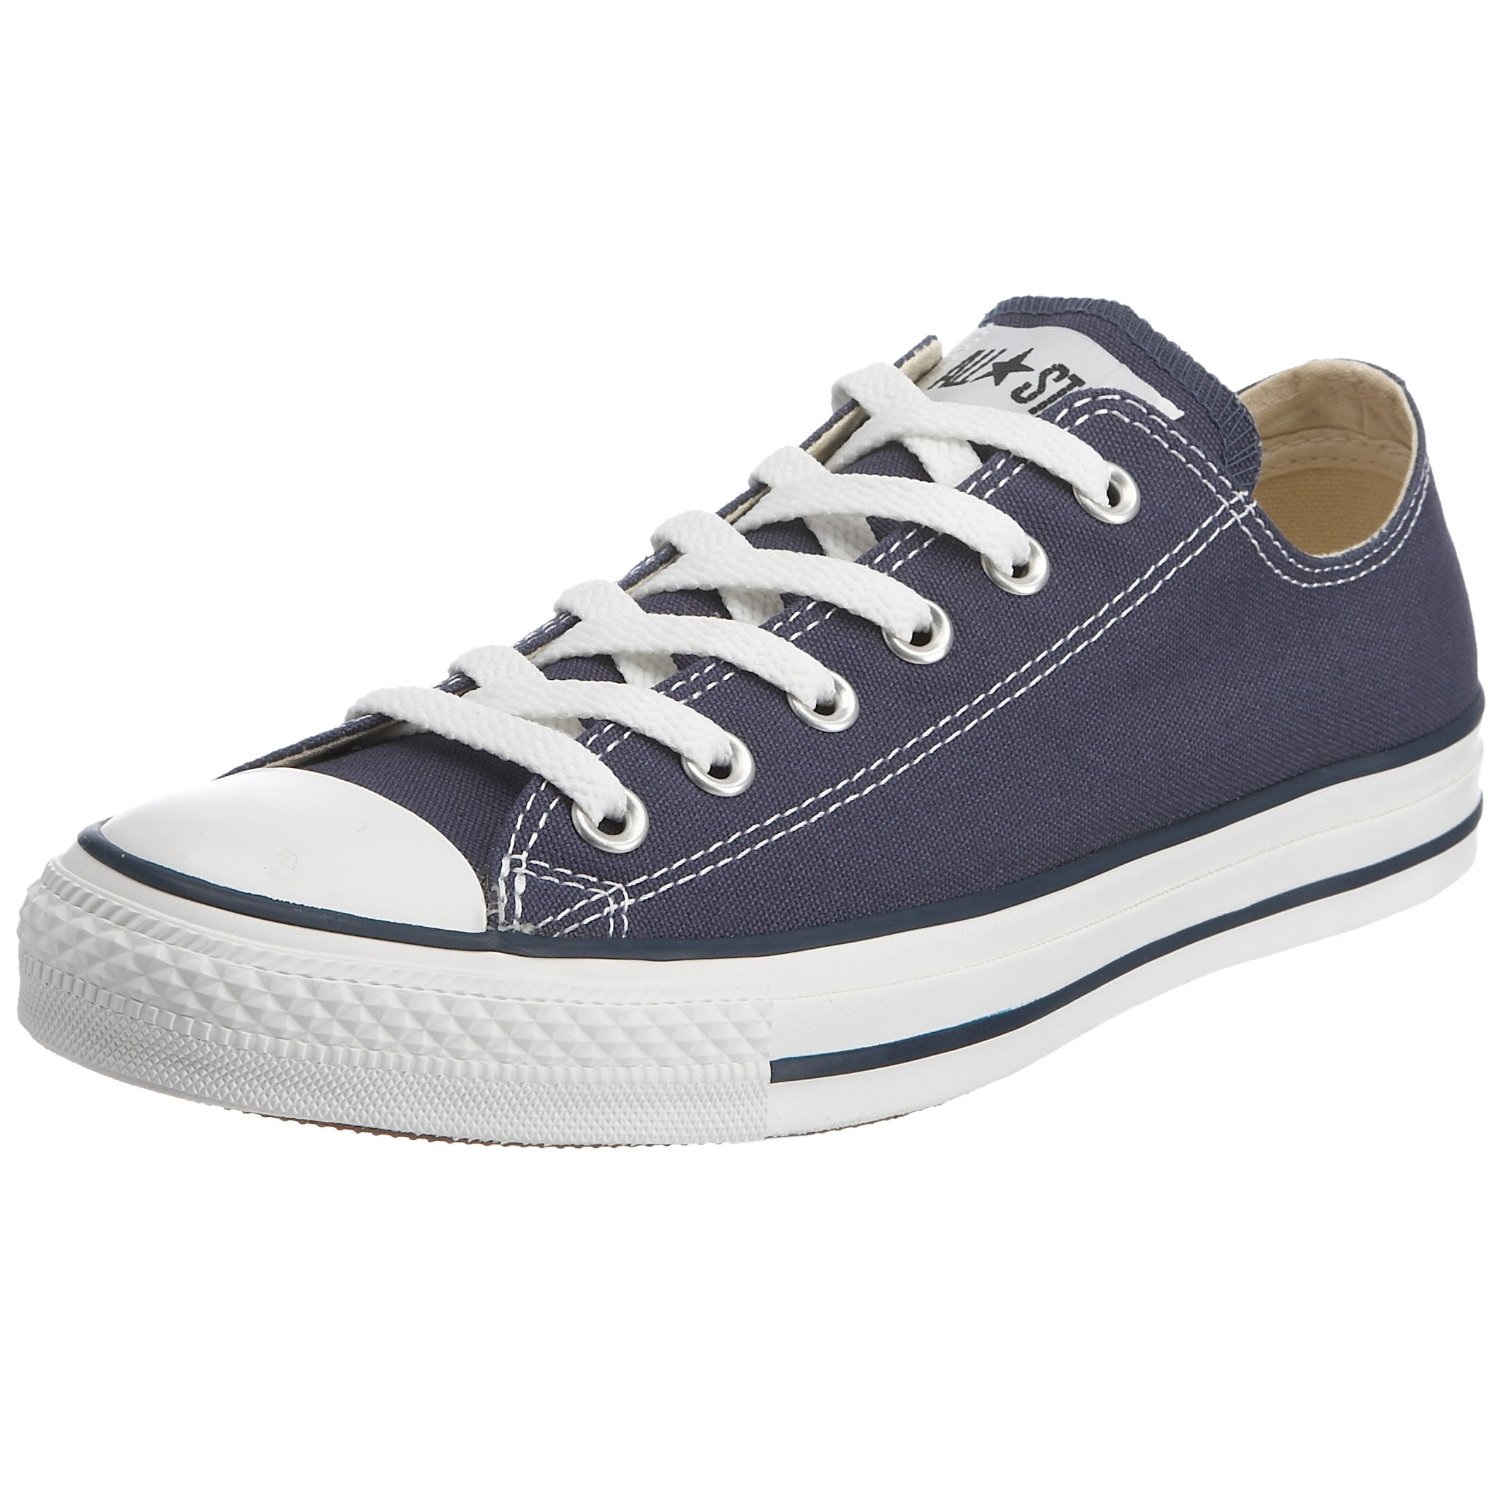 Converse Unisex Chuck low Fashion-Sneakers - image 1 of 7